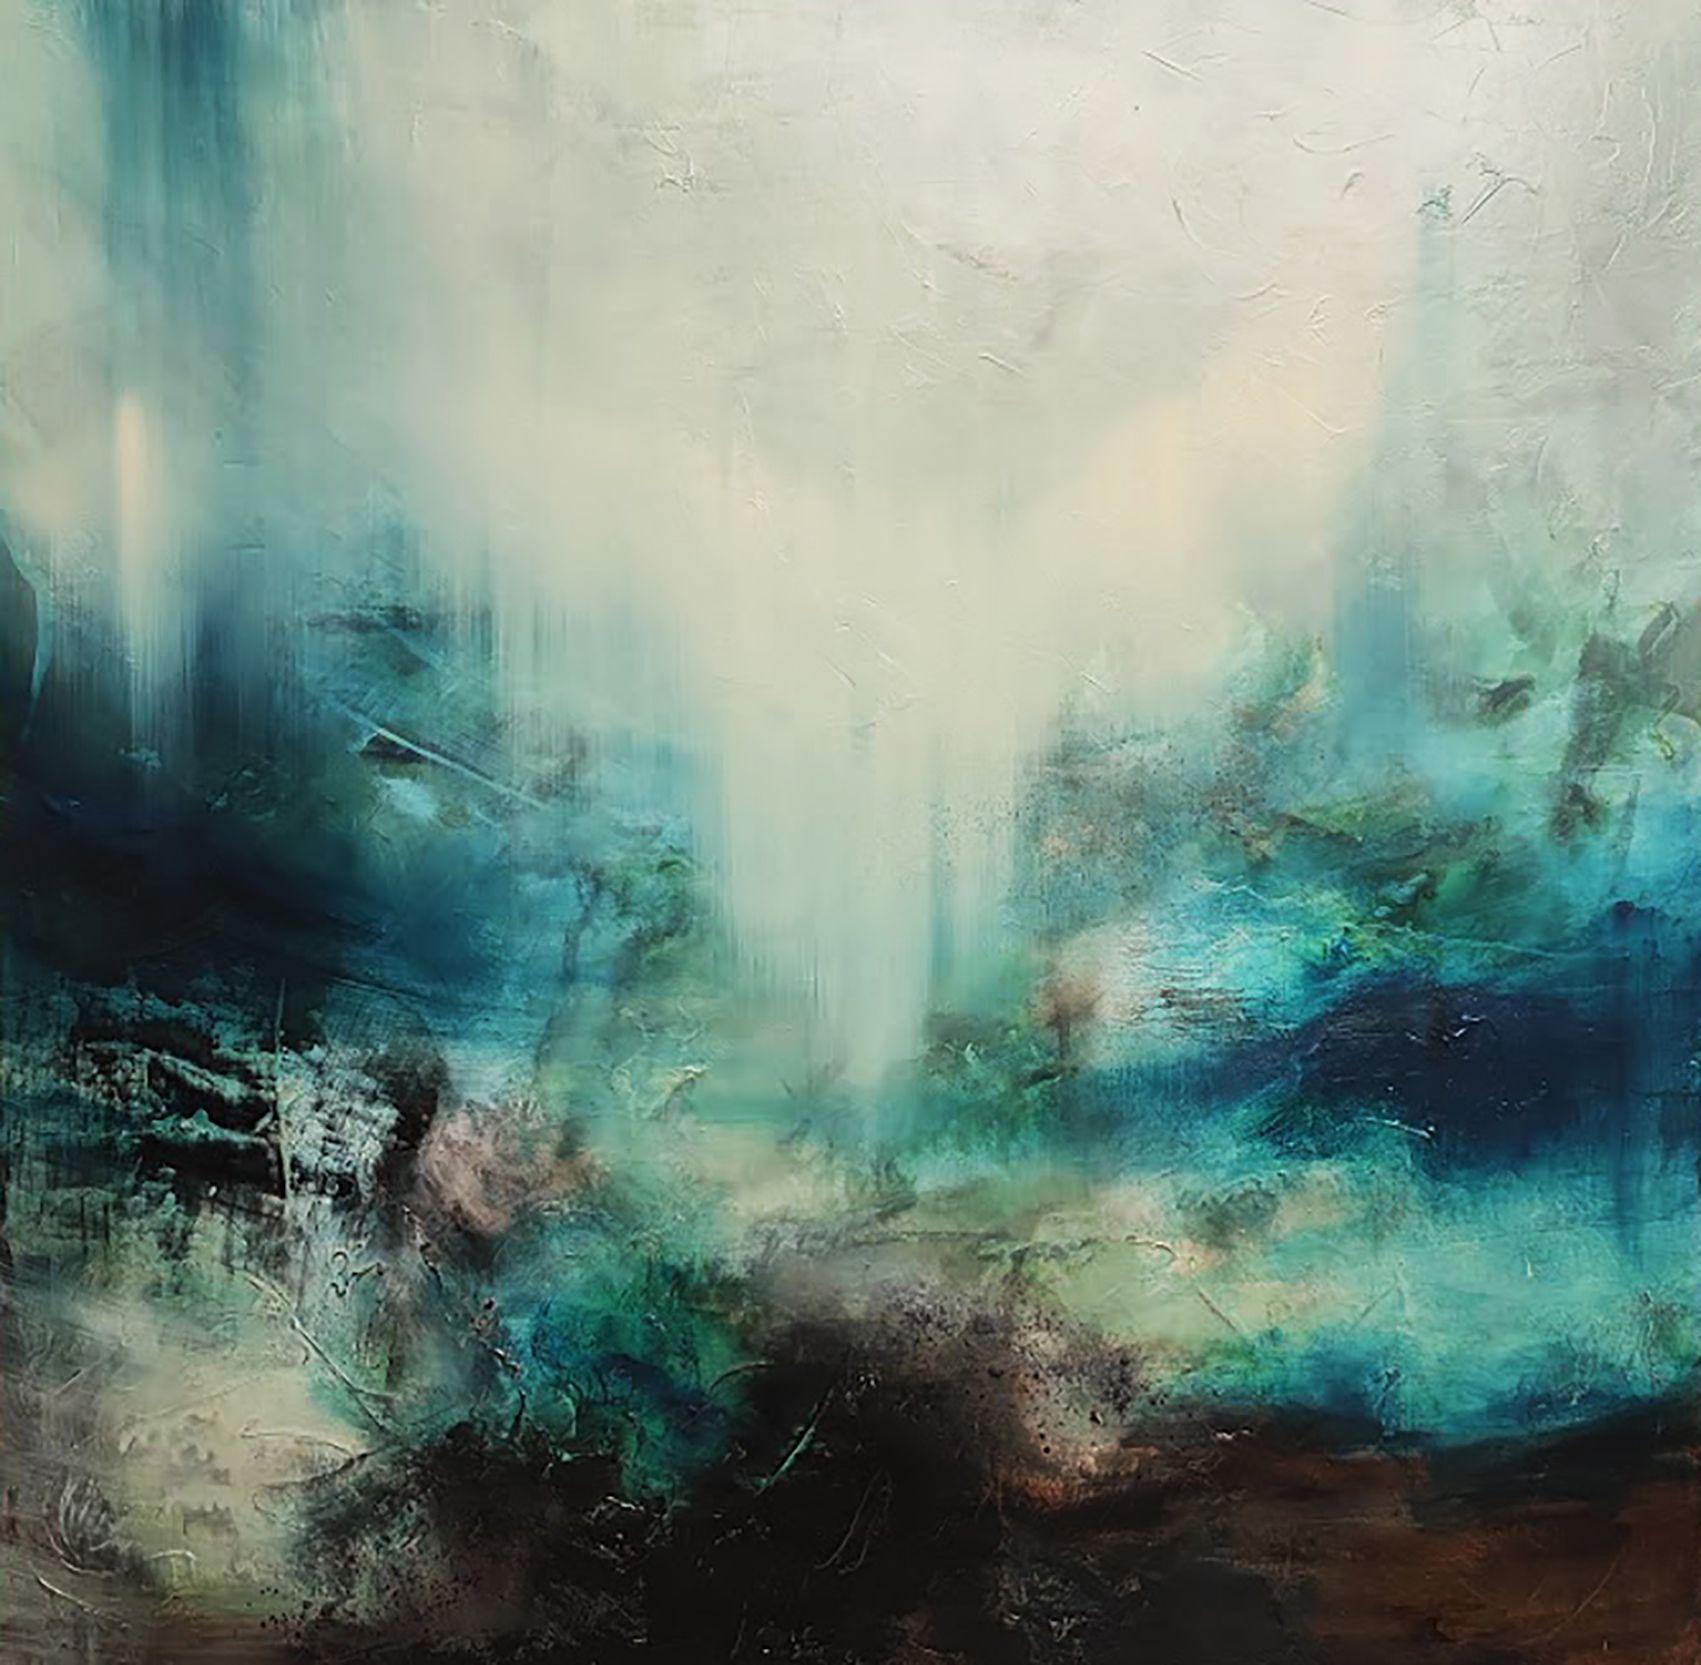 Julia Swaby Abstract Painting - Blue Valley, Painting, Oil on Canvas